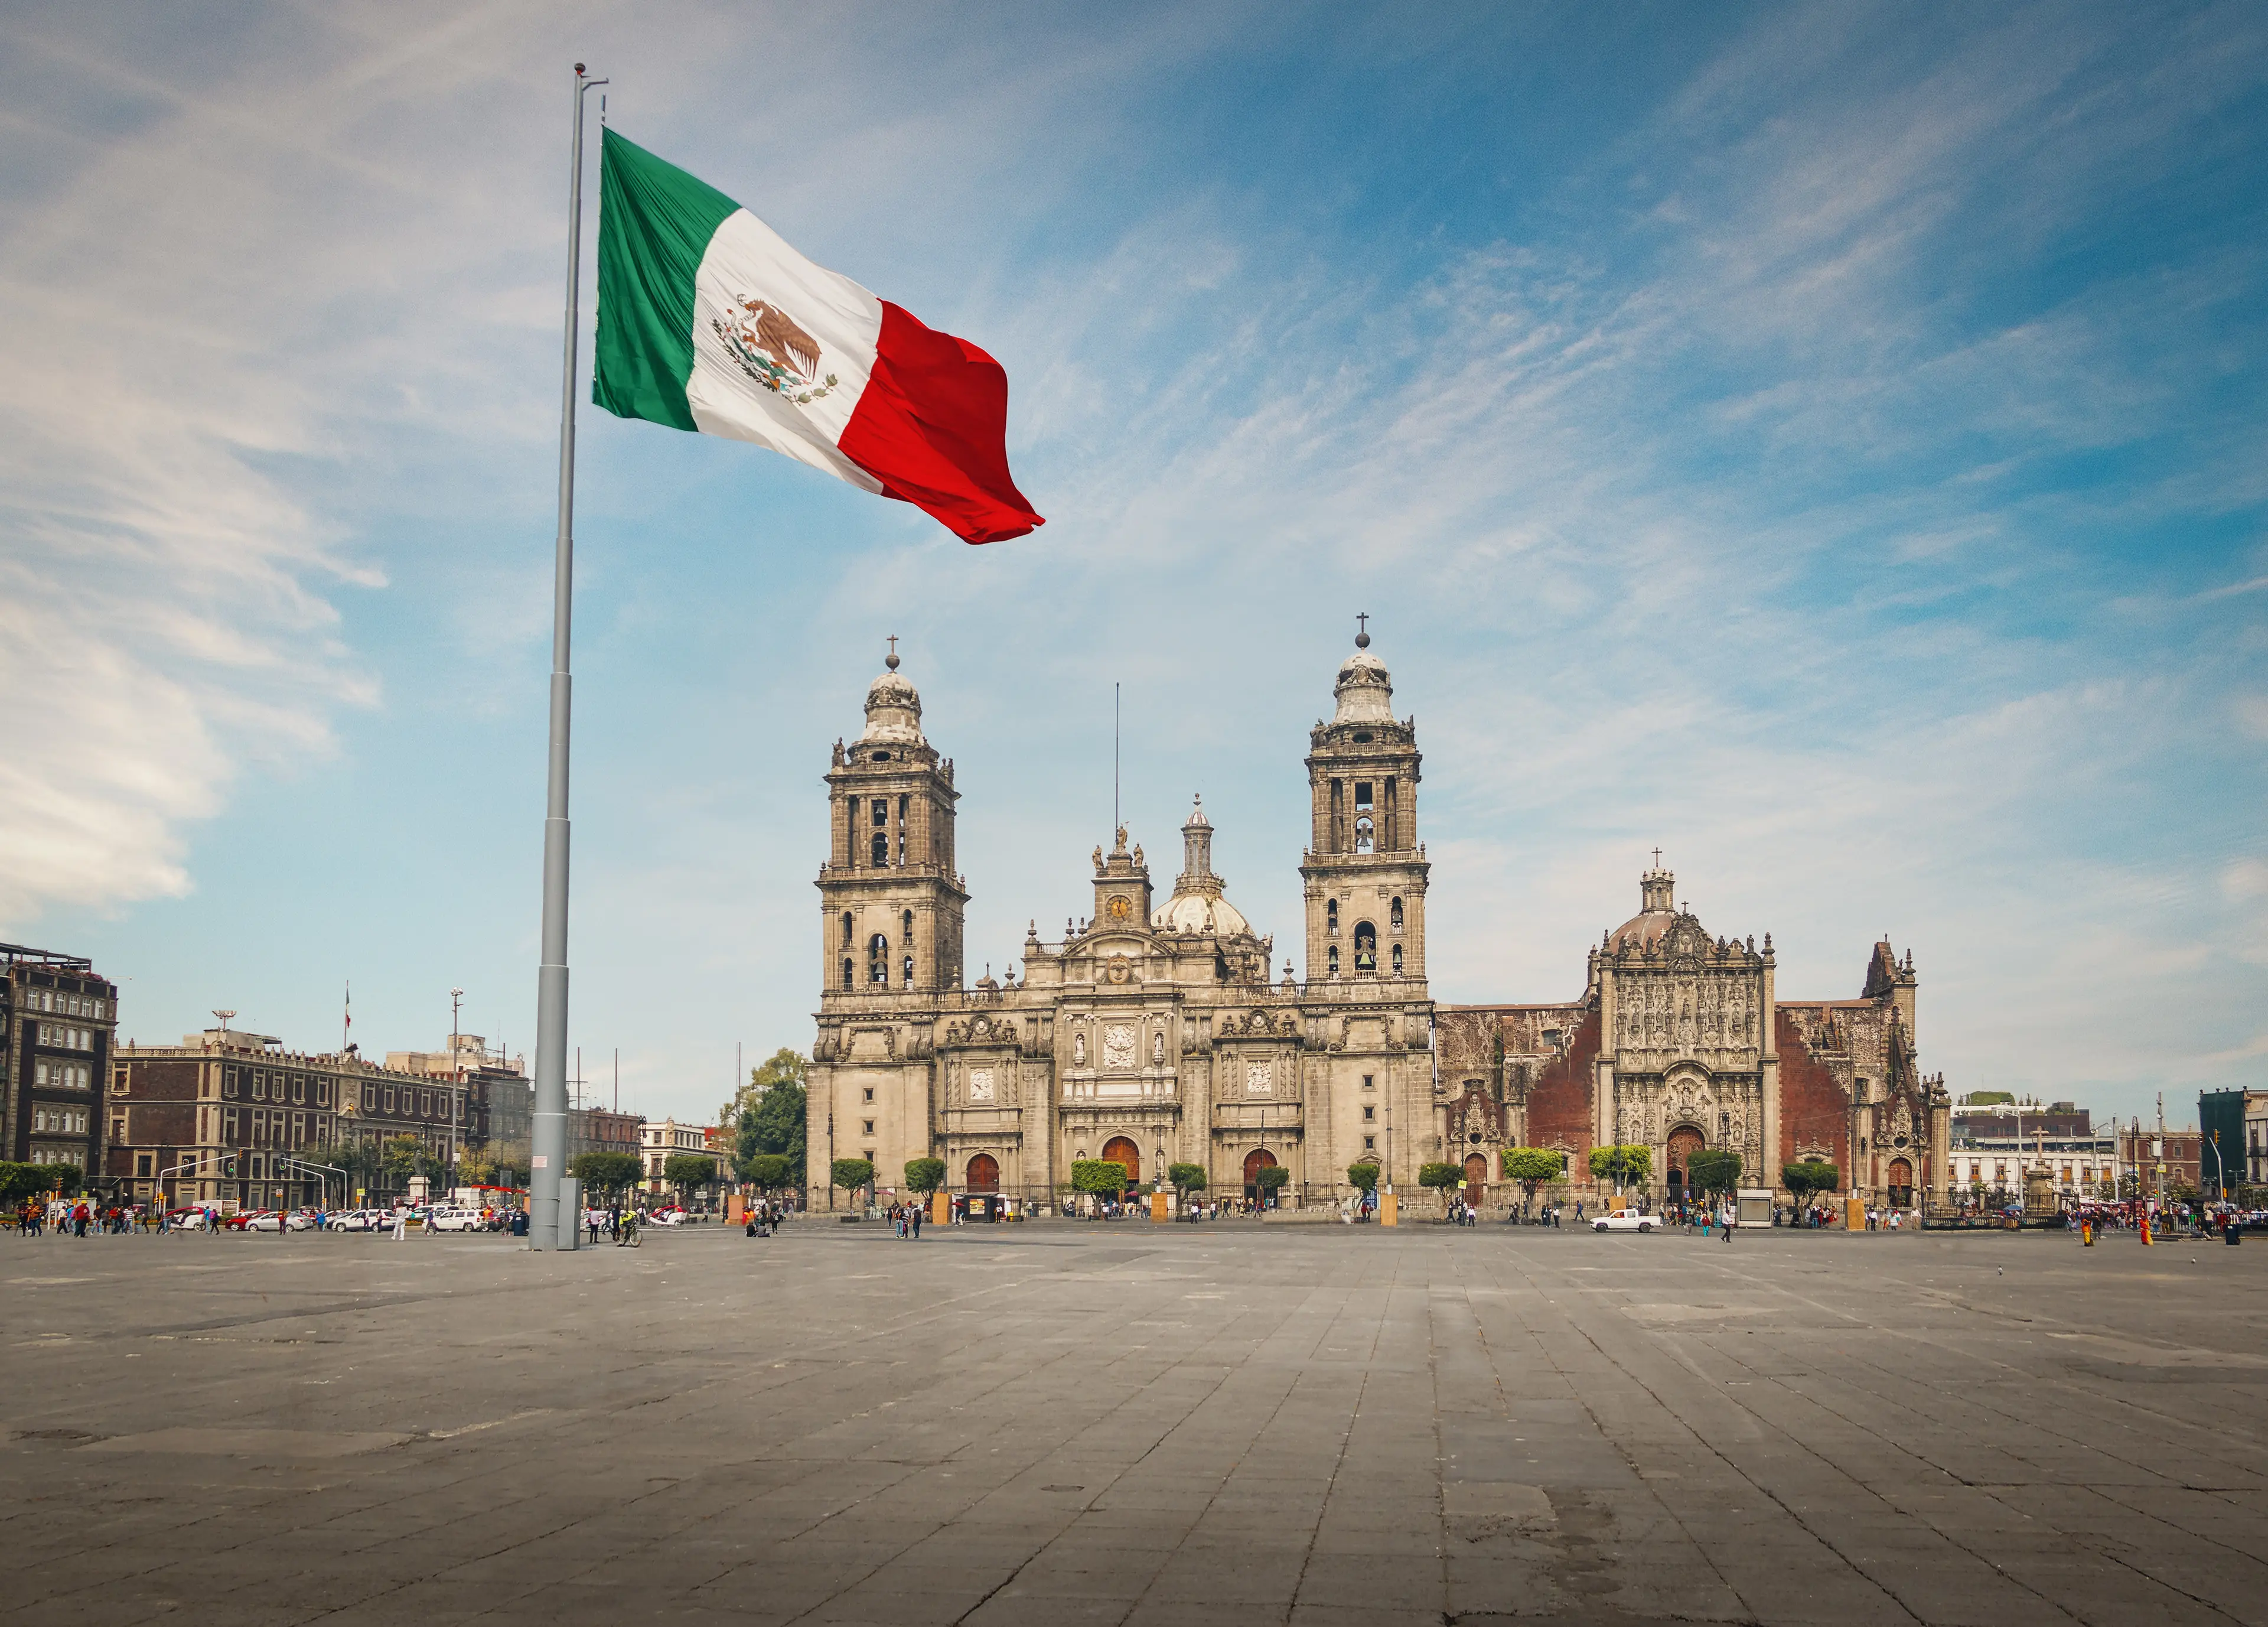 Zocalo square and city cathedral